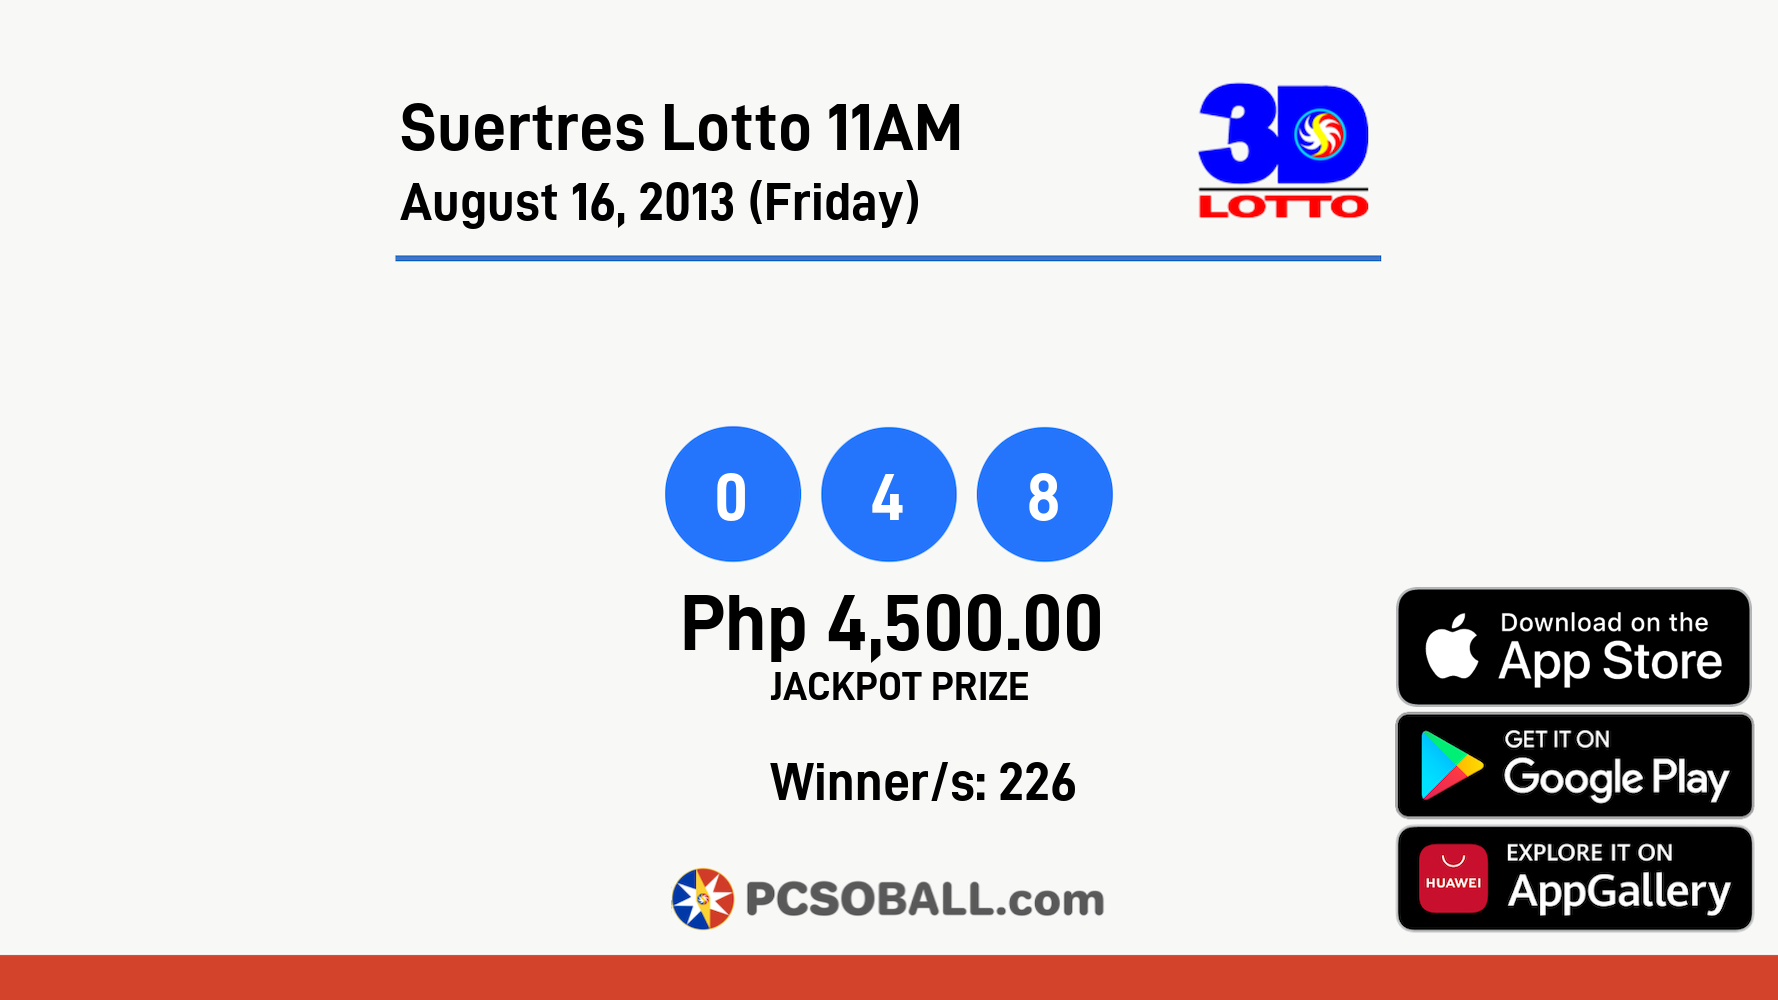 Suertres Lotto 11AM August 16, 2013 (Friday) Result